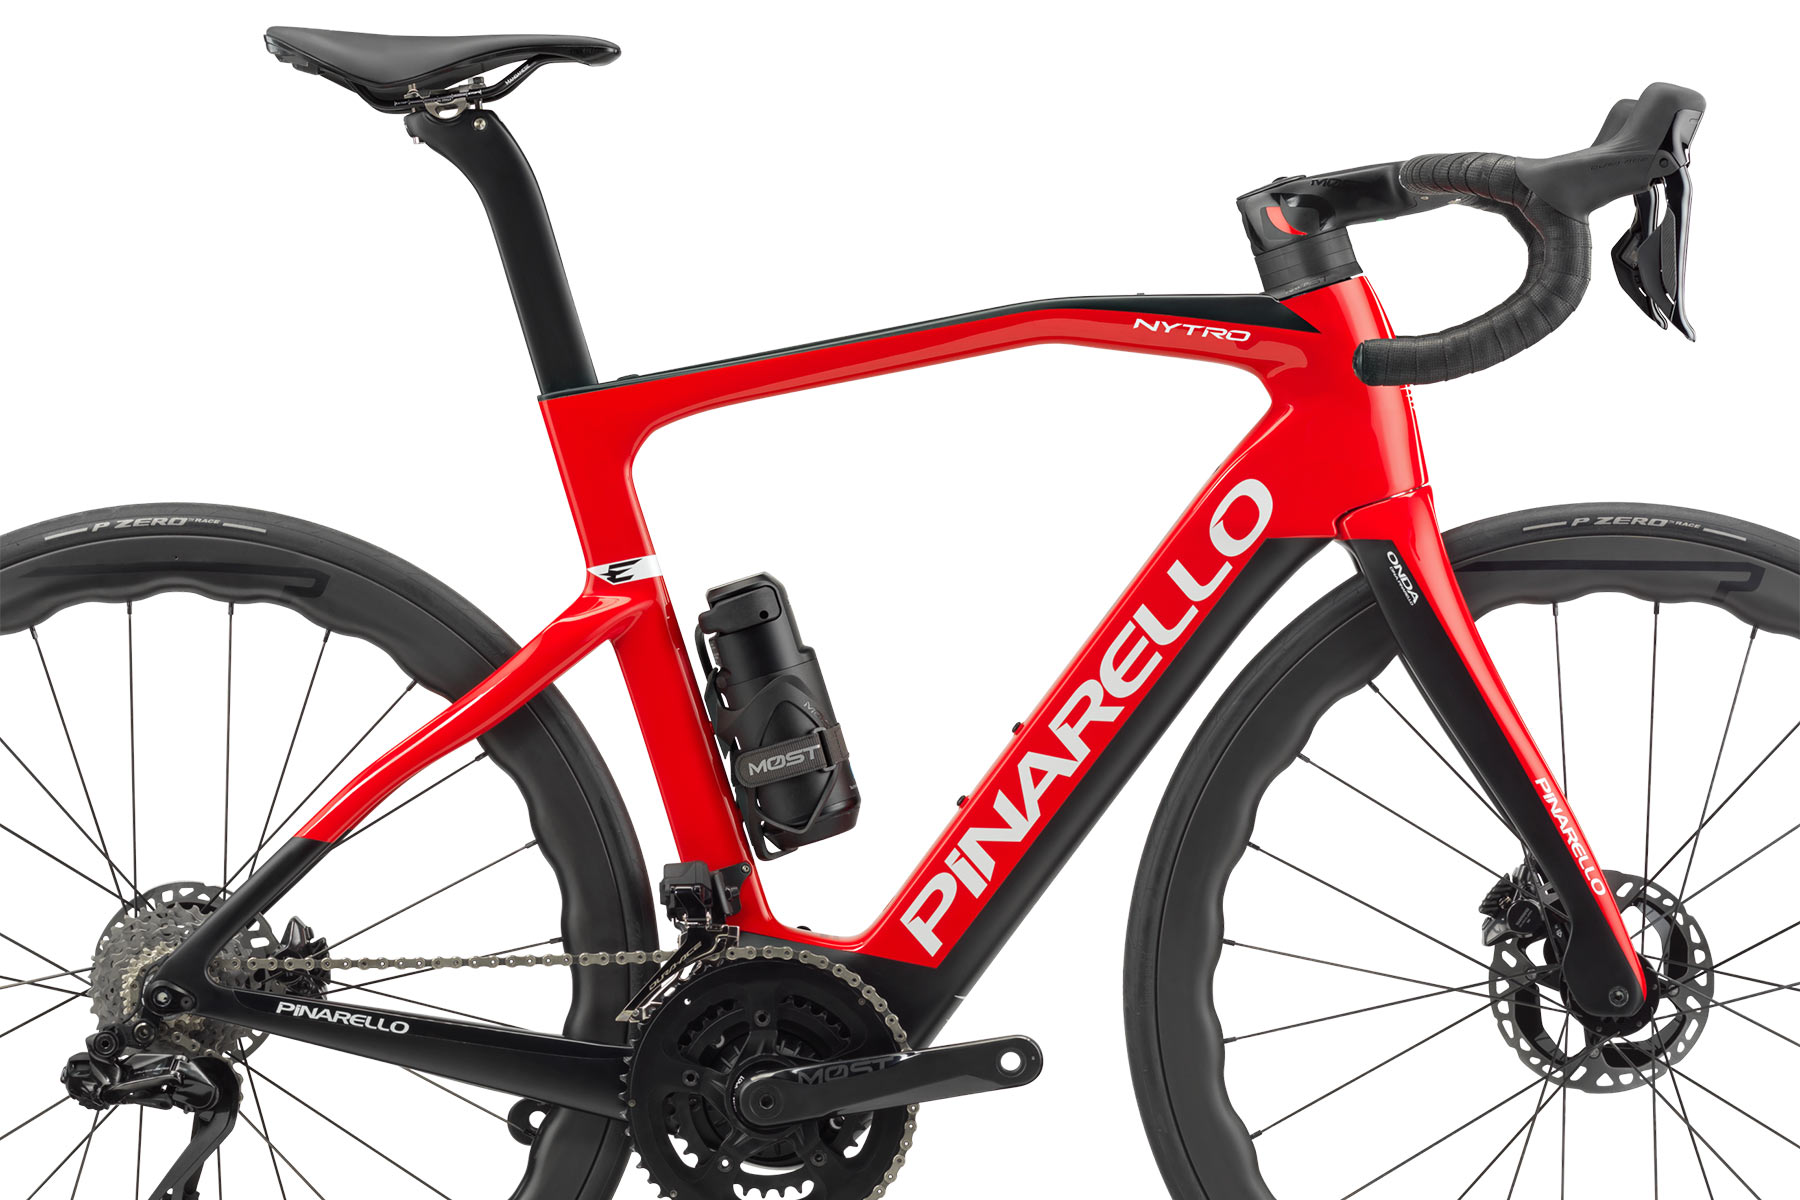 Revamped Pinarello Nytro claims to be lightest mid-drive e-road